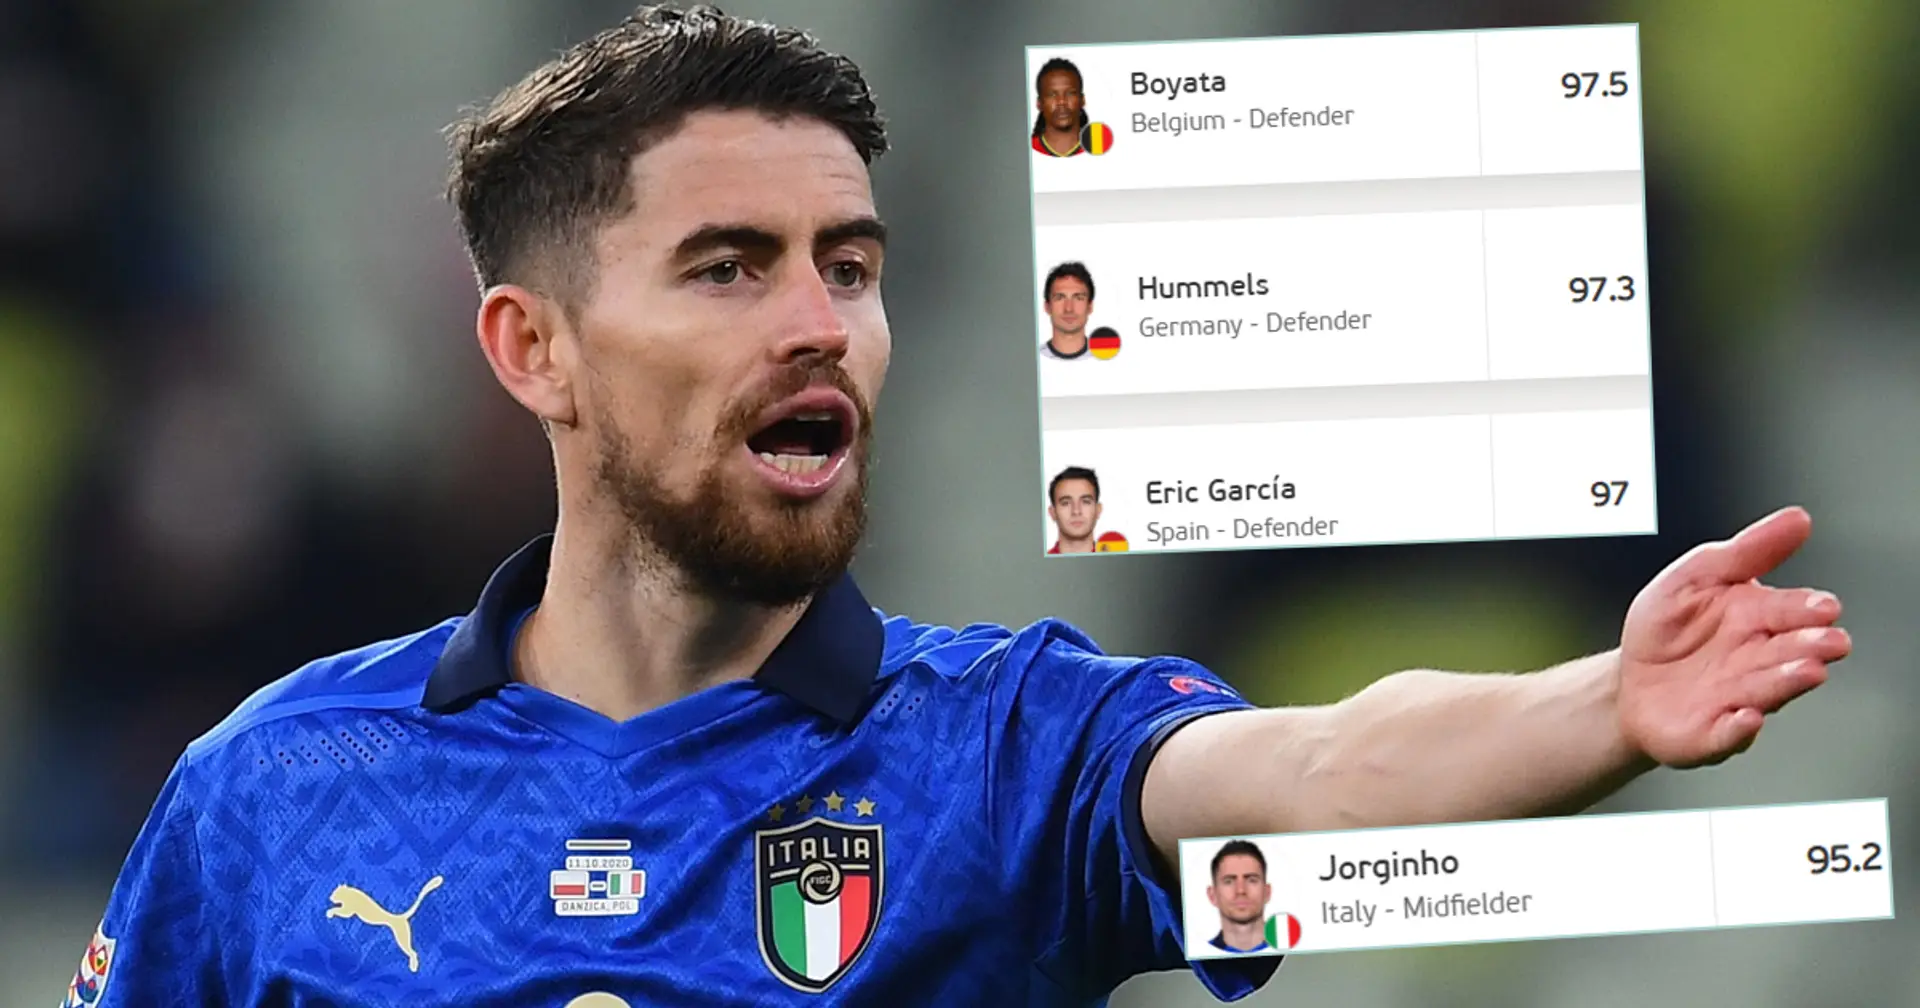 Chelsea player boasts best passing accuracy at Euros — it's not Jorginho